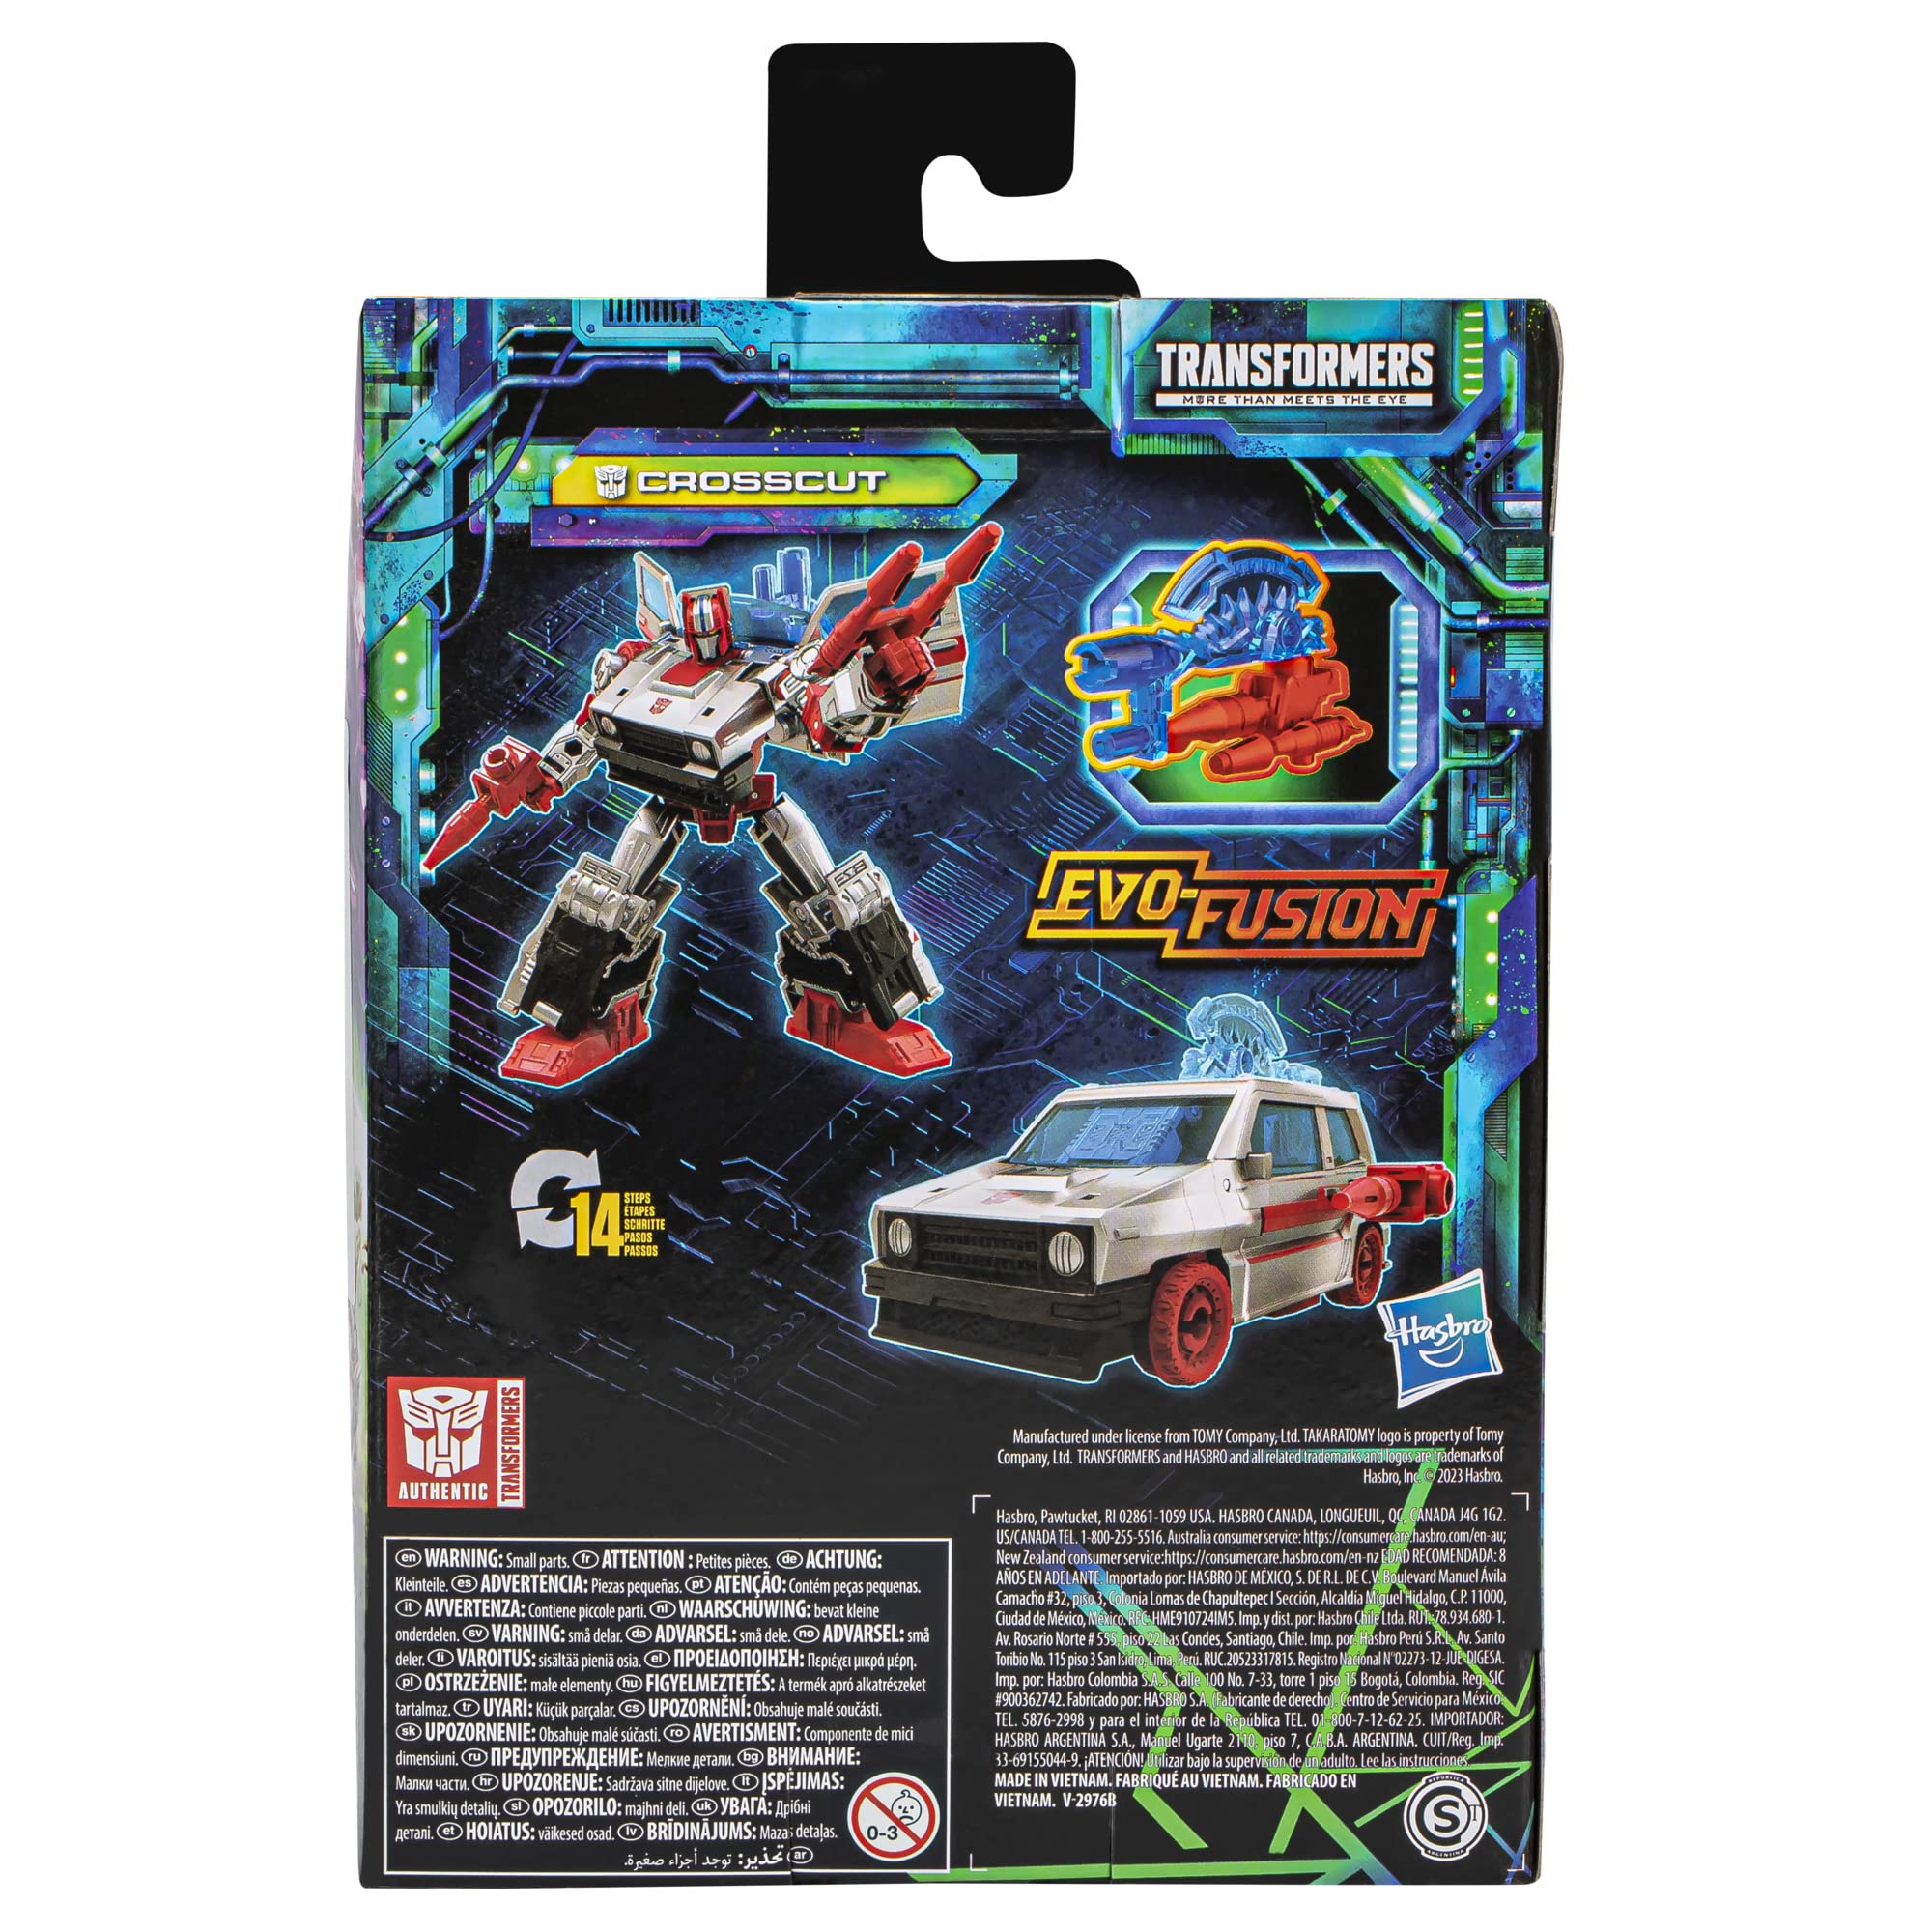 Transformers Toys Legacy Evolution Deluxe Crosscut Toy, 5.5-inch, Action Figure for Boys and Girls Ages 8 and Up